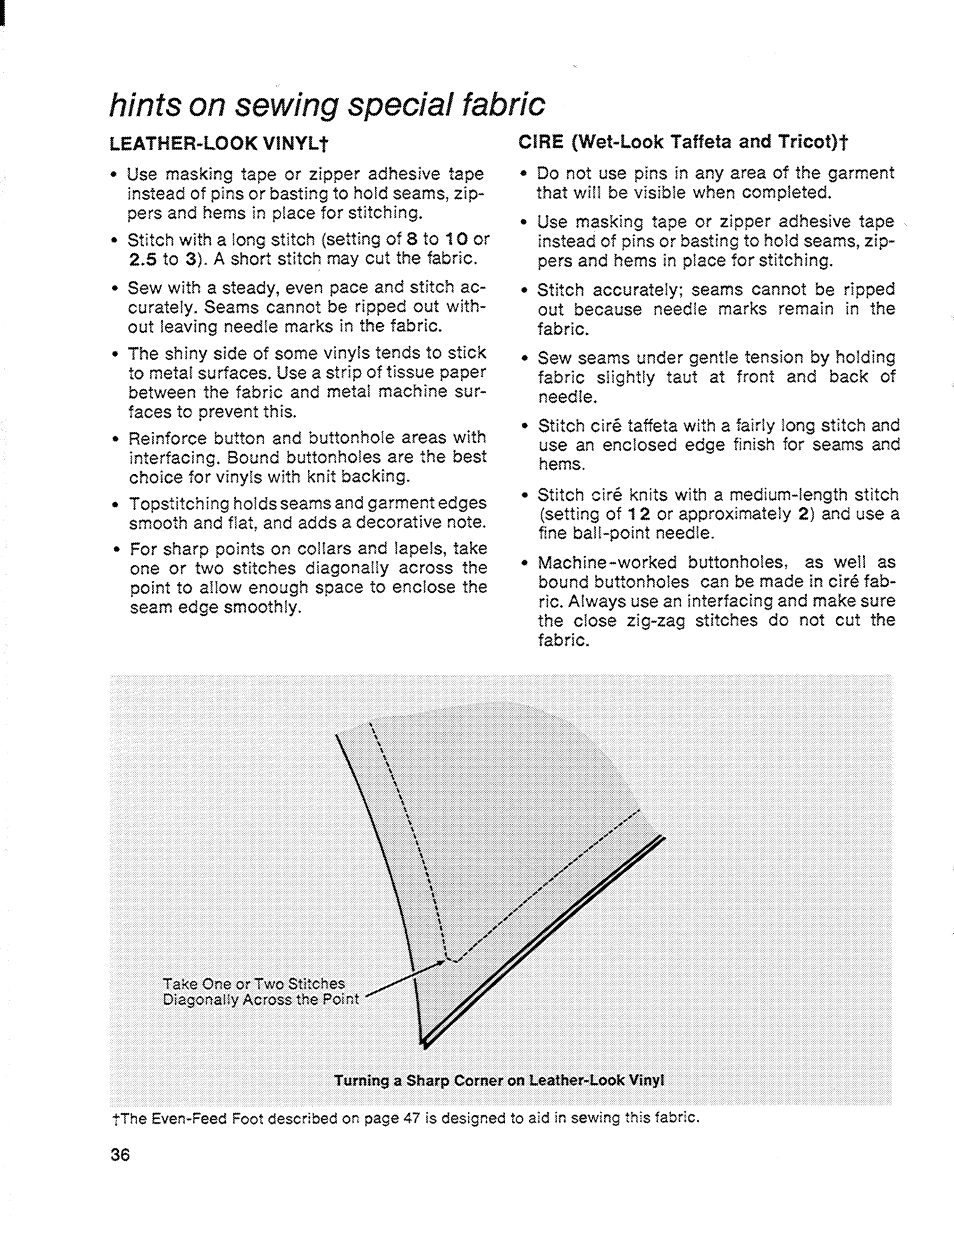 Hints on sewing special fabric | SINGER 714 Graduate User Manual | Page 38 / 52